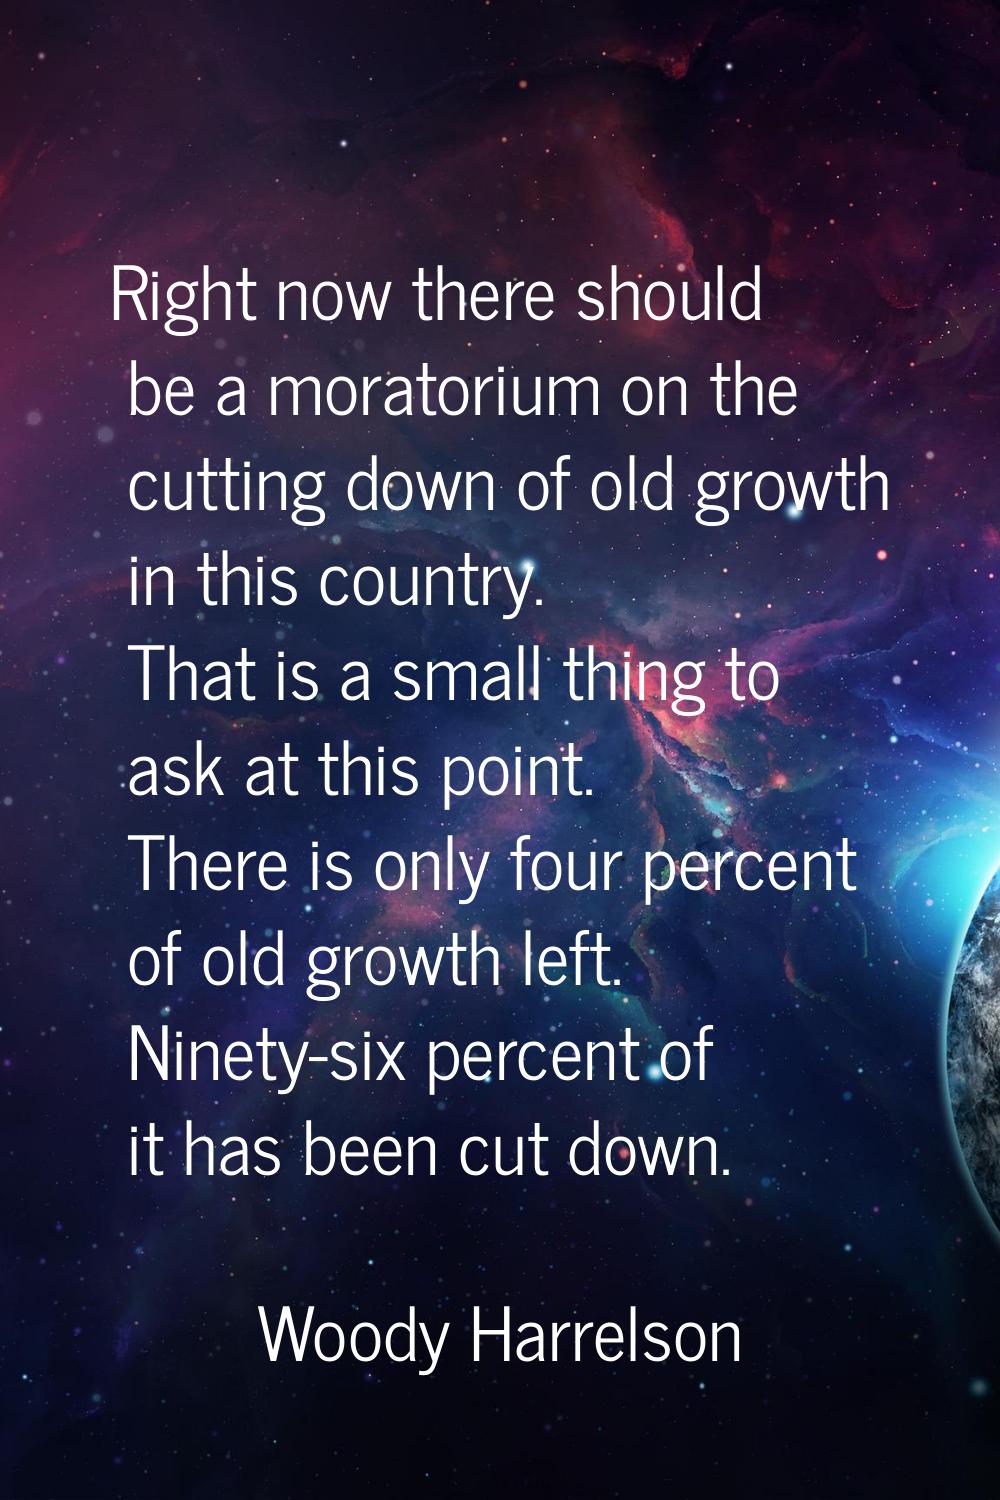 Right now there should be a moratorium on the cutting down of old growth in this country. That is a